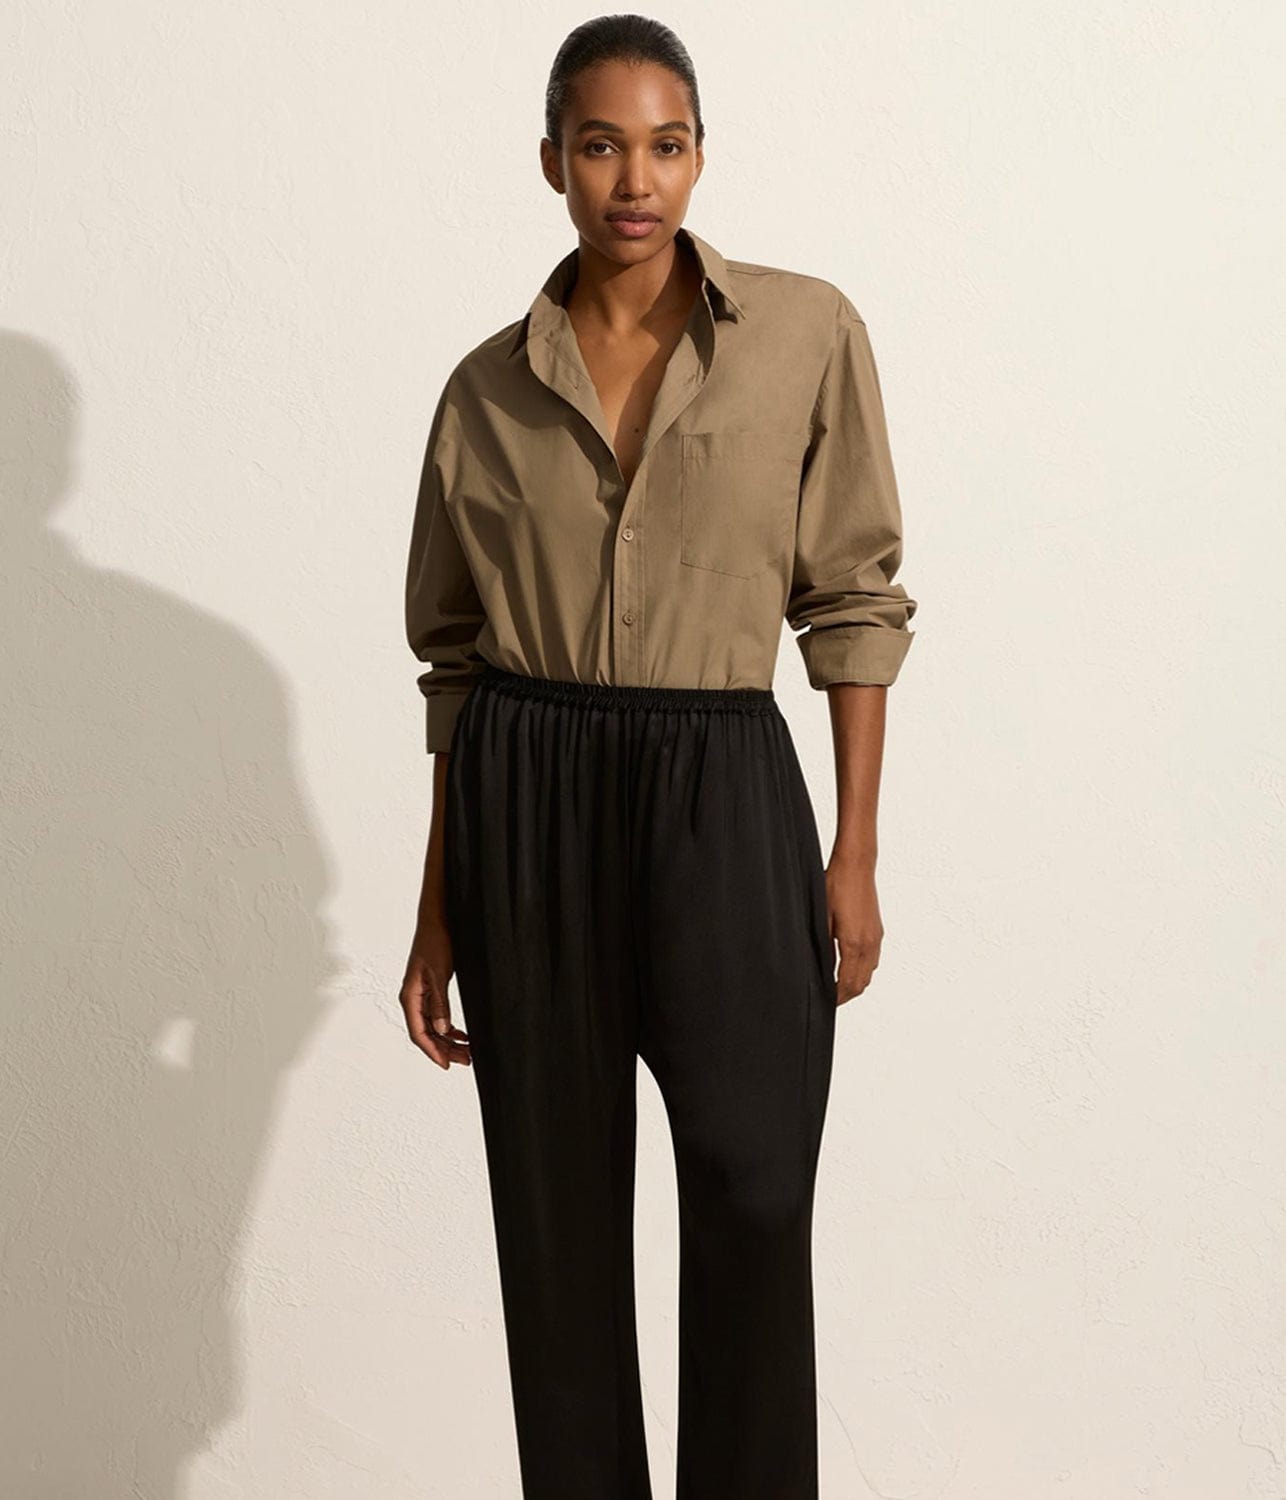 RELAXED SHIRT - TAUPE | MATTEAU | MATTEAU RELAXED SHIRT - TAUPE